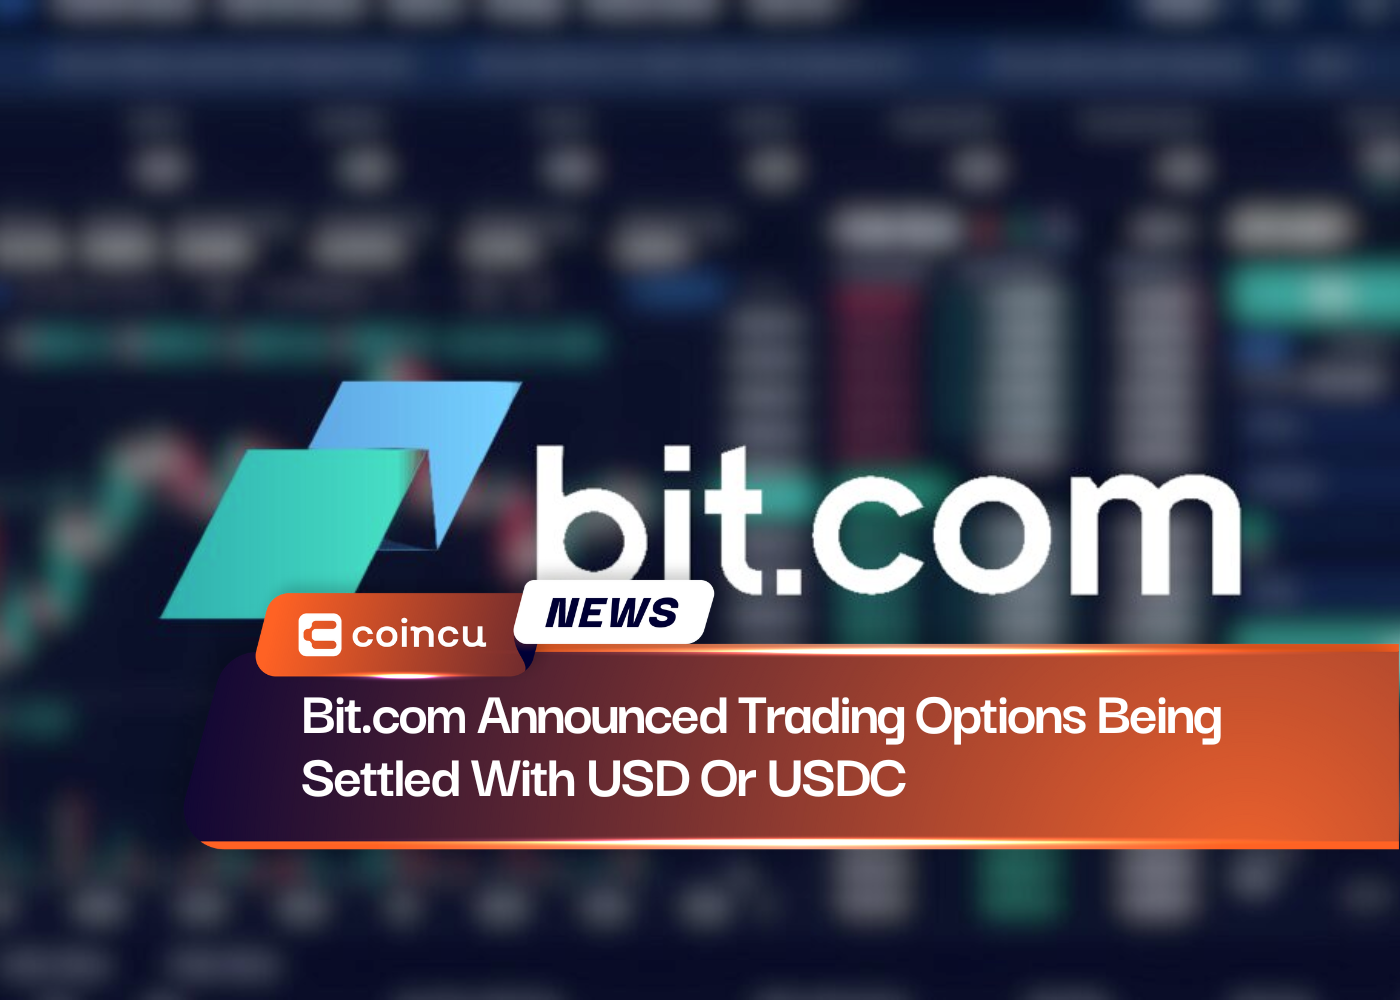 Bit.com Announced Trading Options Being Settled With USD Or USDC